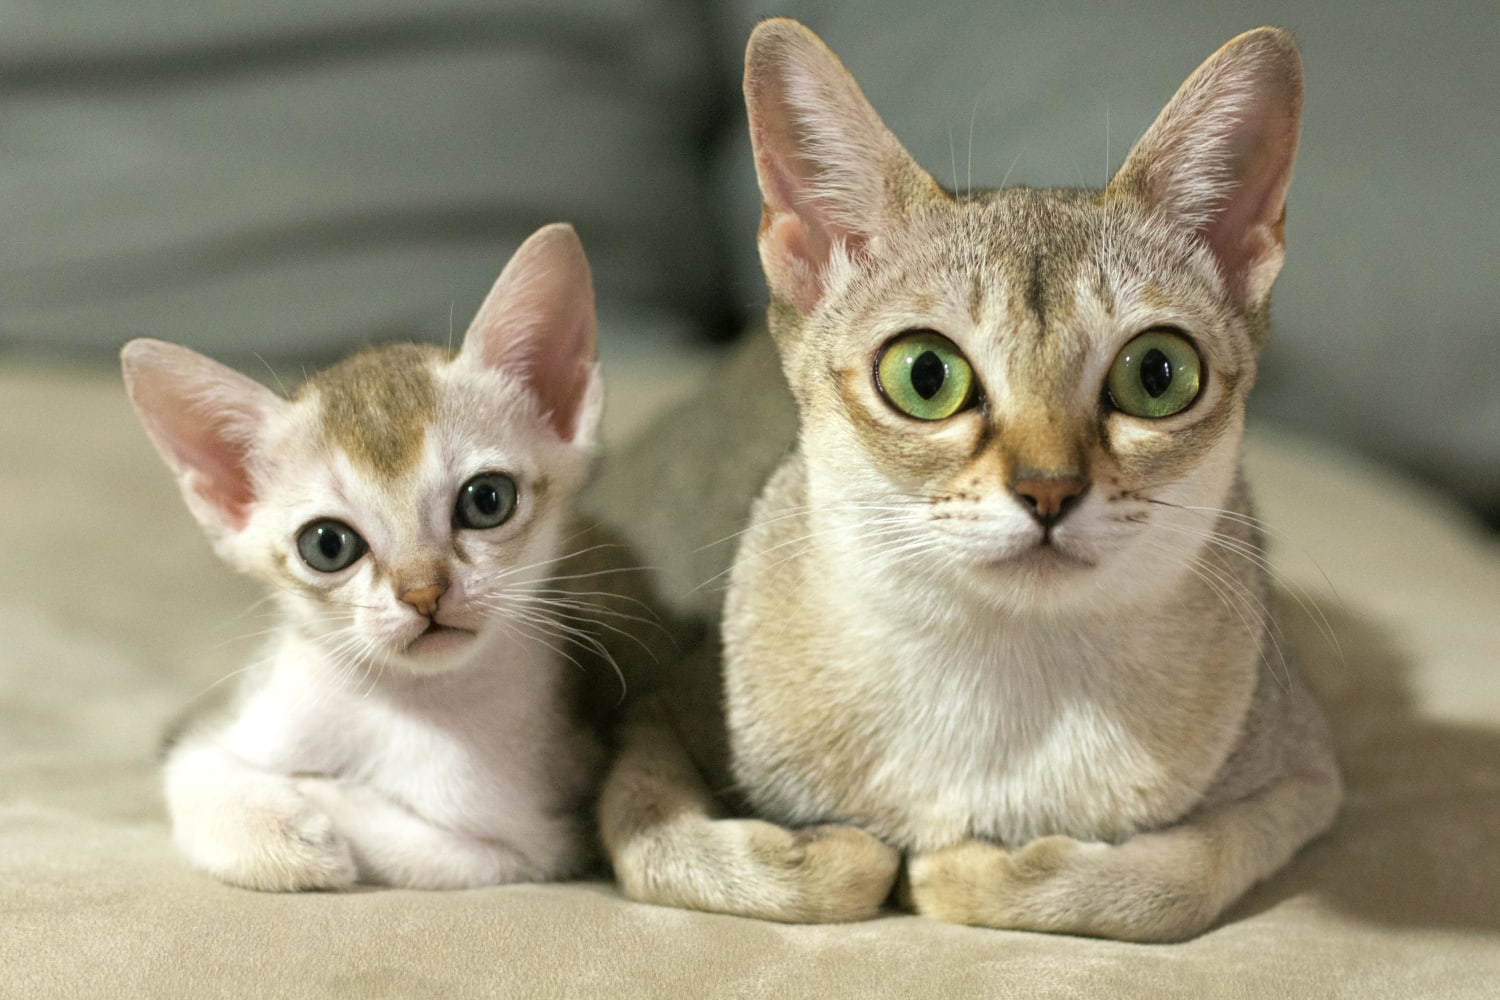 Singapura cats are among the smallest breeds of cats, only weighing at most 2.5 kg (6 lb) and are known for their sepia coat.Their origins are considered a source of mystery. They were originally believed to be from Singapore but breeders believe they're a cross between Abyssinians and Burmese cats.